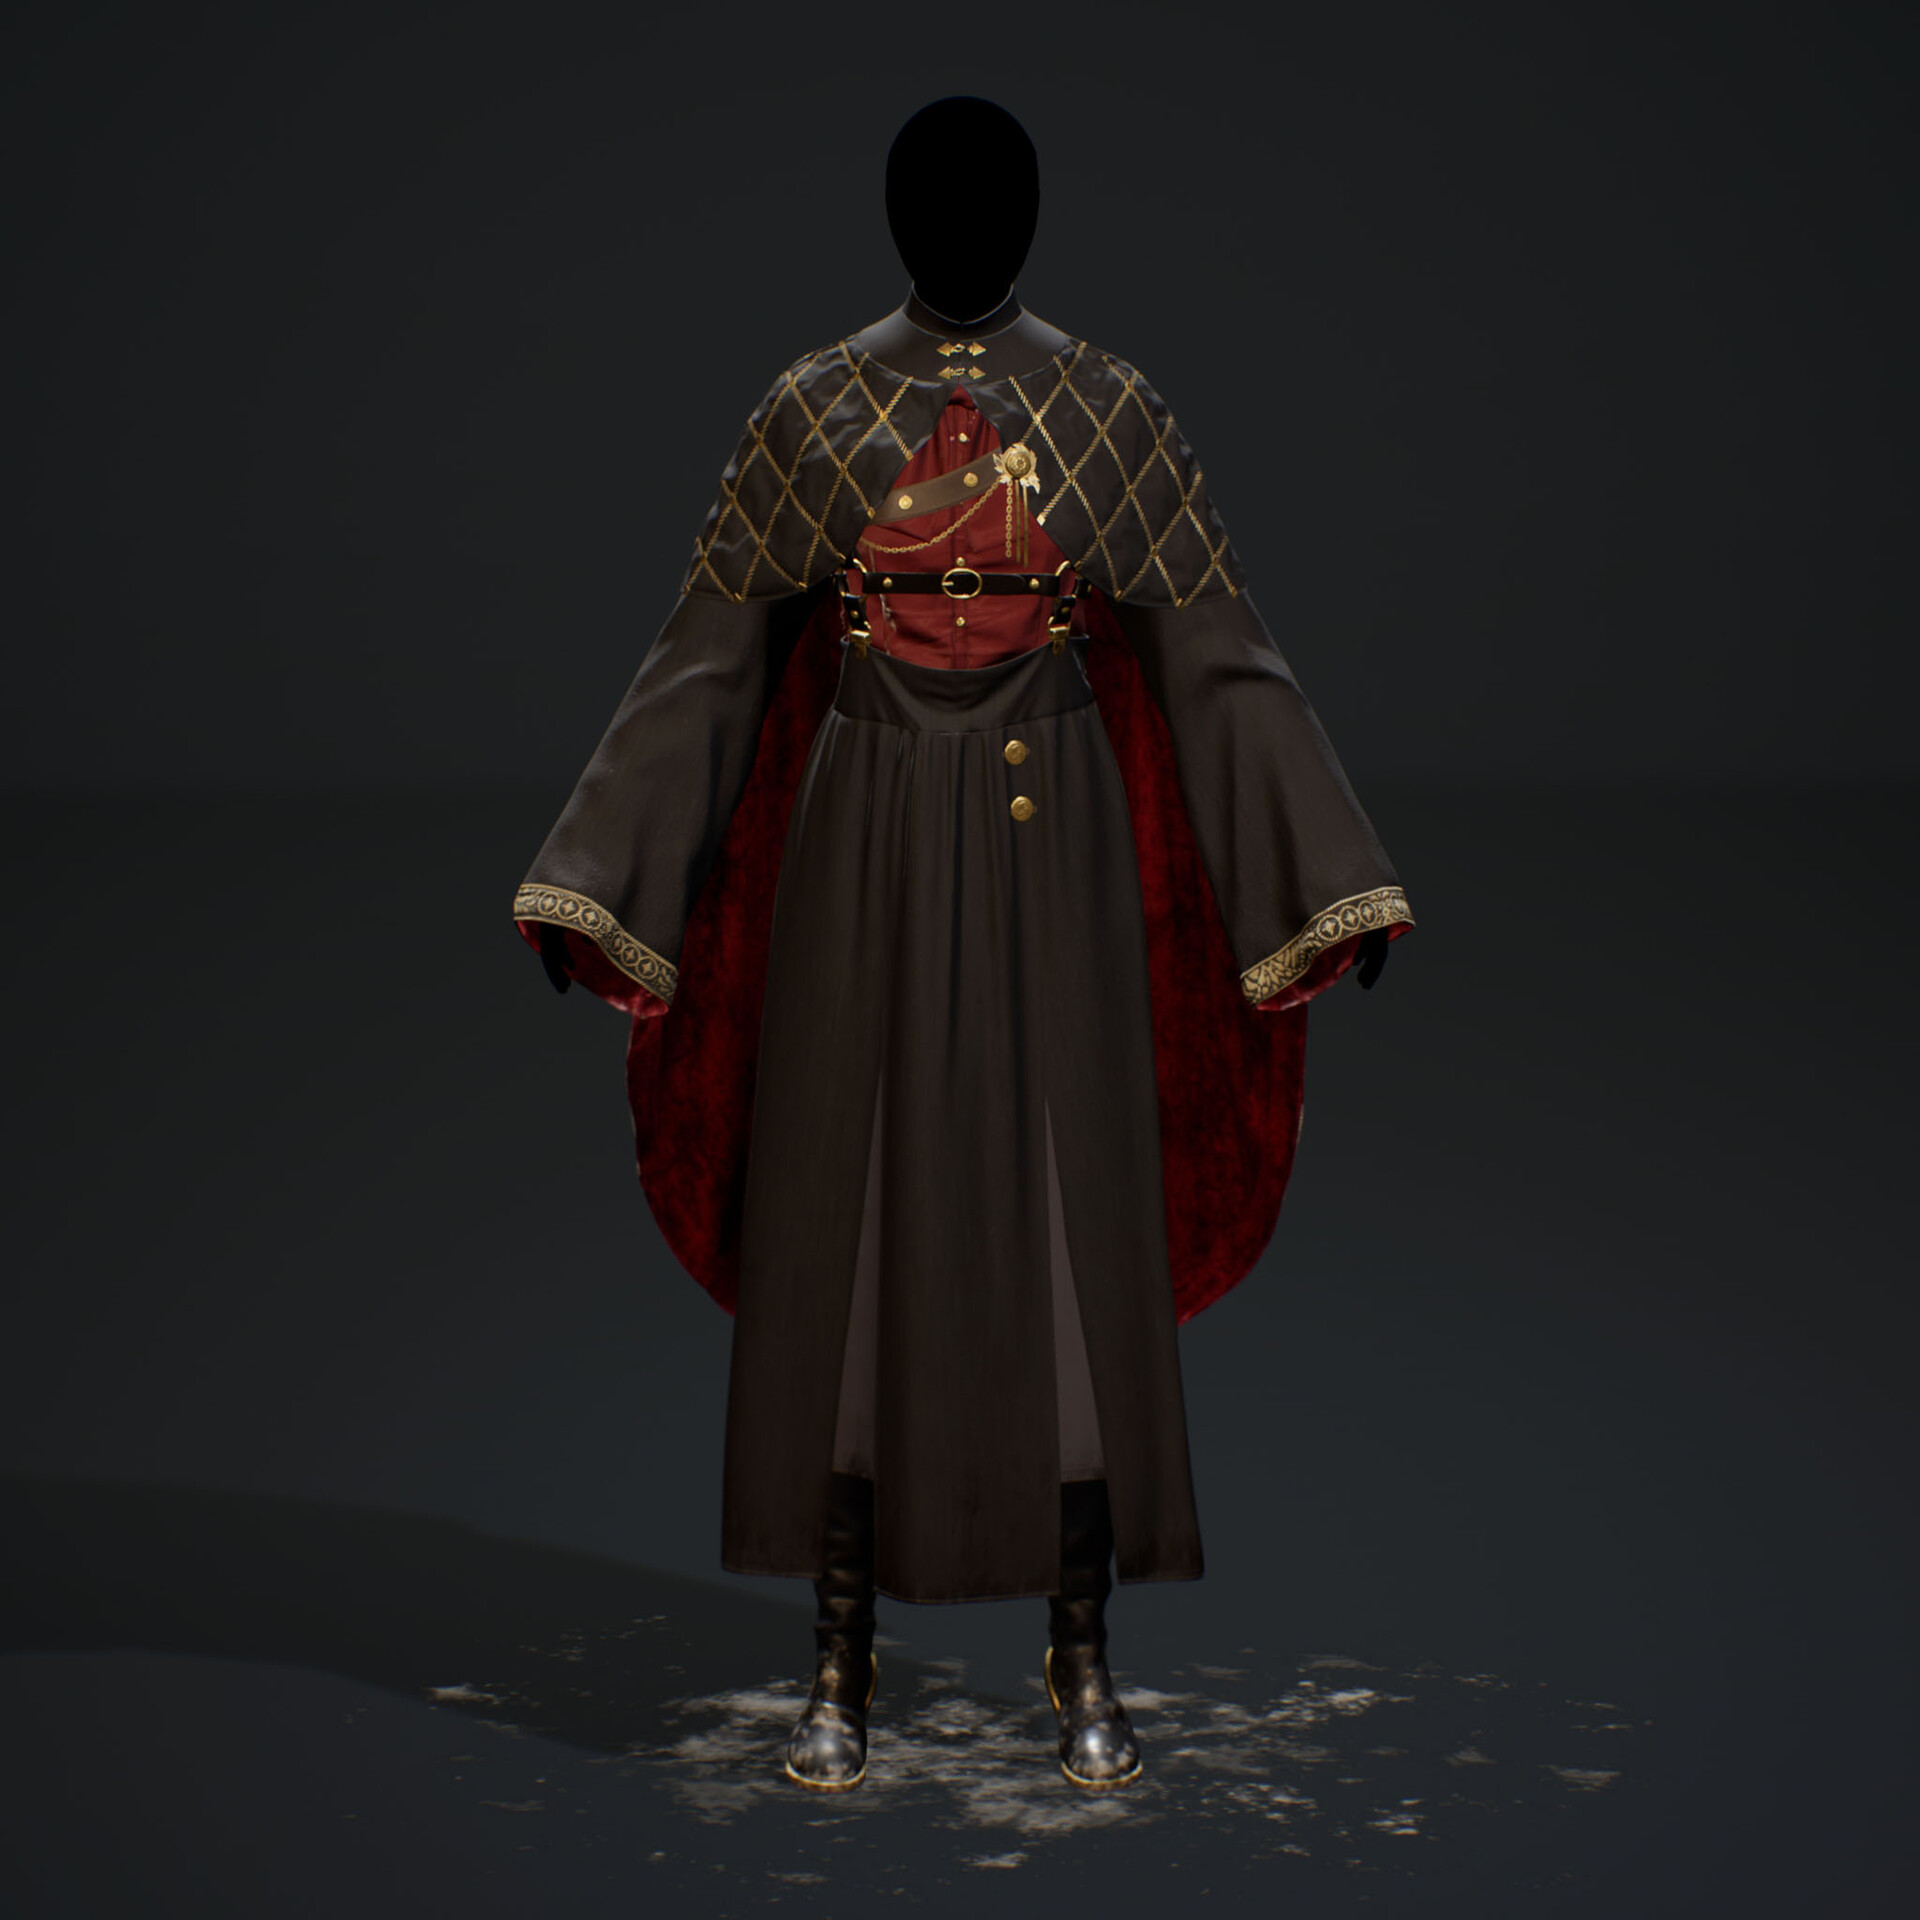 ArtStation - My CGMA Course Project for Cloth Creation and Simulation ...